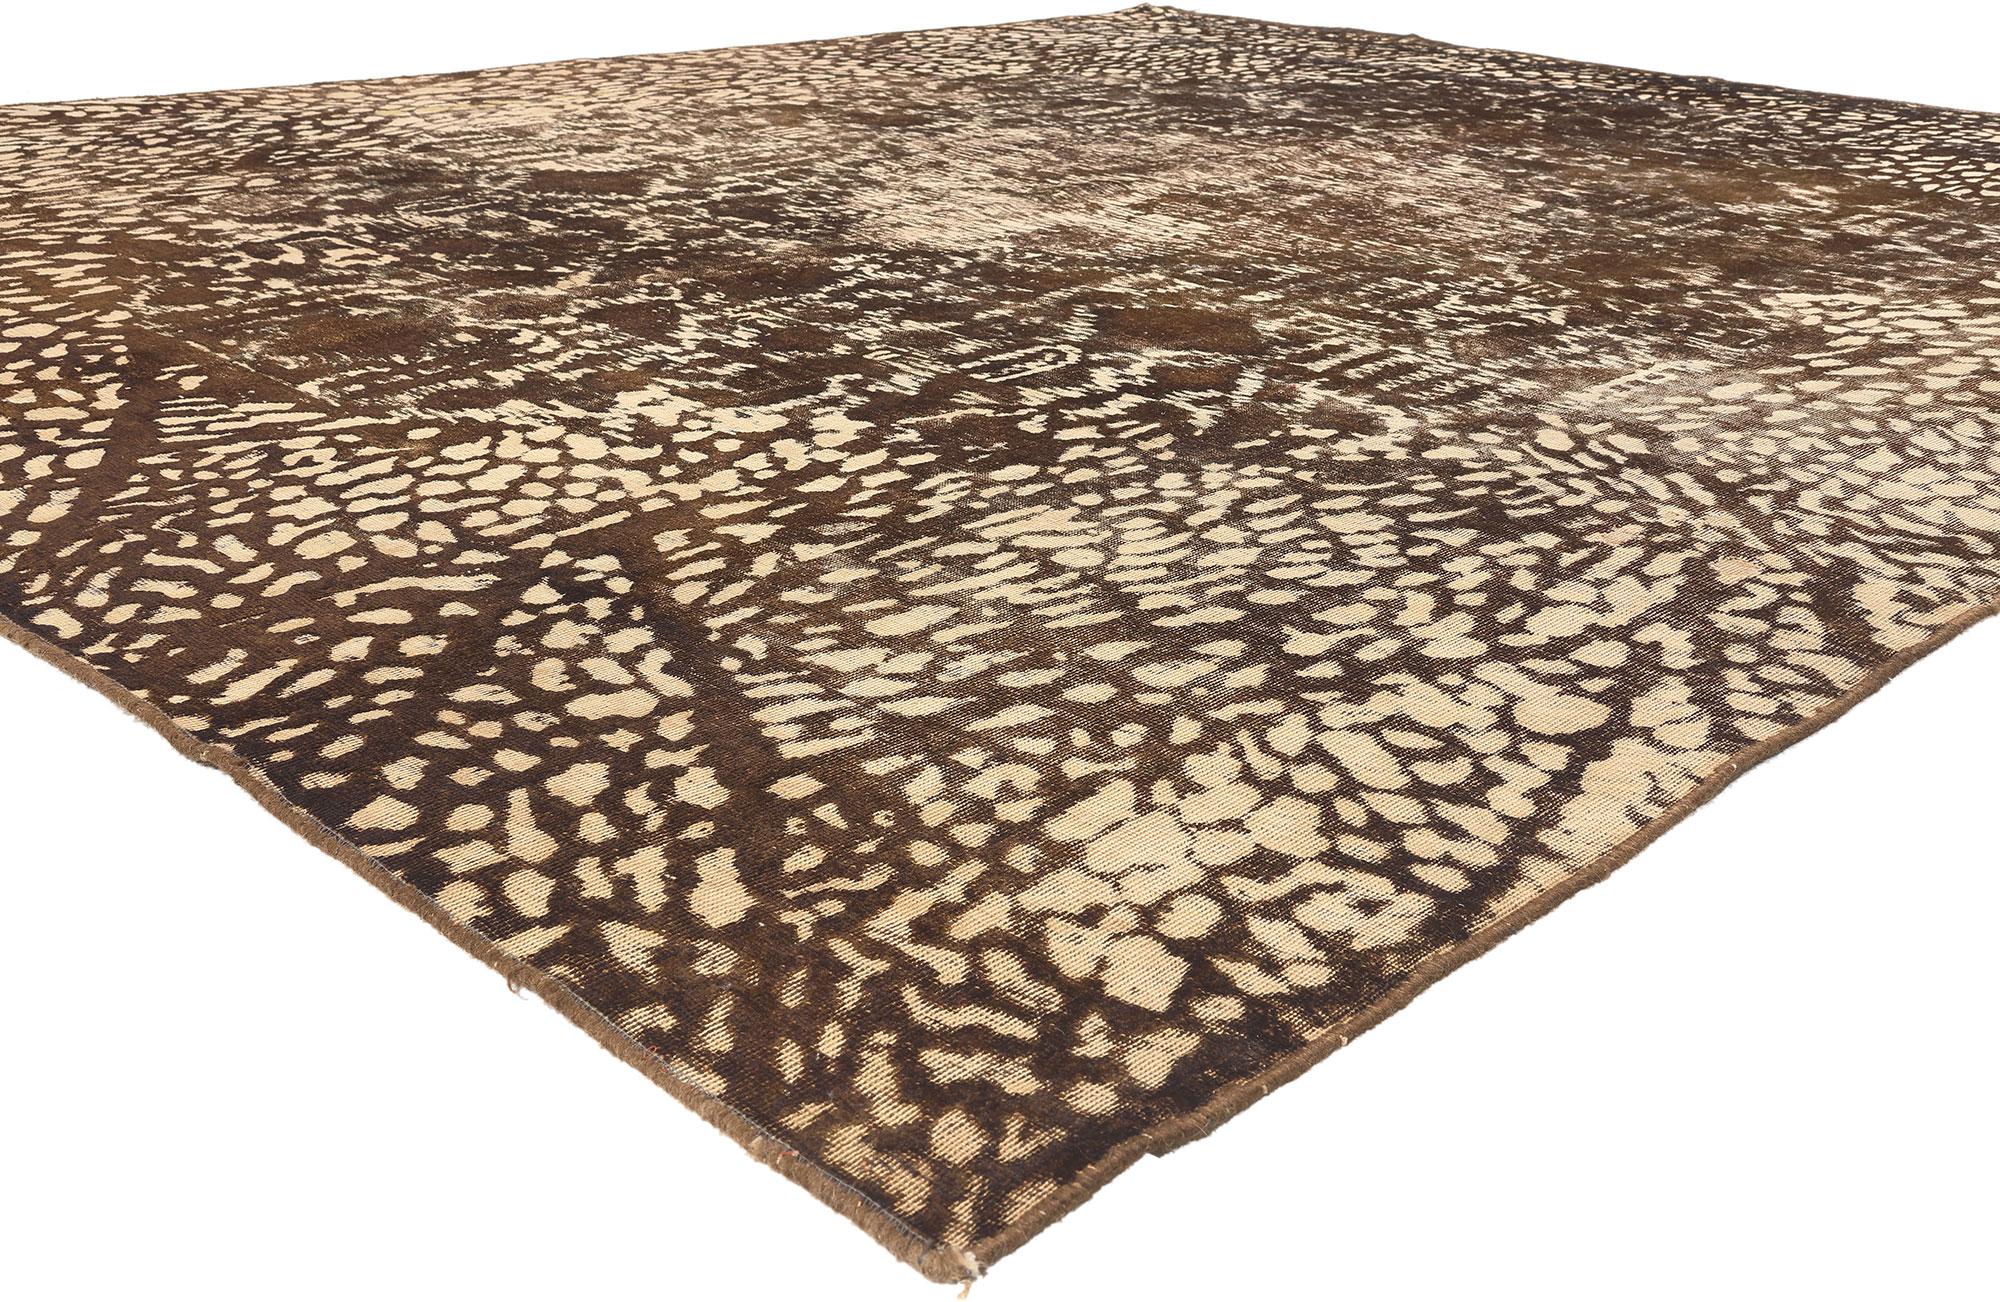 60731 Vintage Turkish Overdyed Rug, 09’11 x 12’06. 
Biophilic Design meets Organic Modern style in this hand knotted wool vintage Turkish Overdyed rug. The geometrical petroglyph design and earthy colorway in this piece work together capturing the